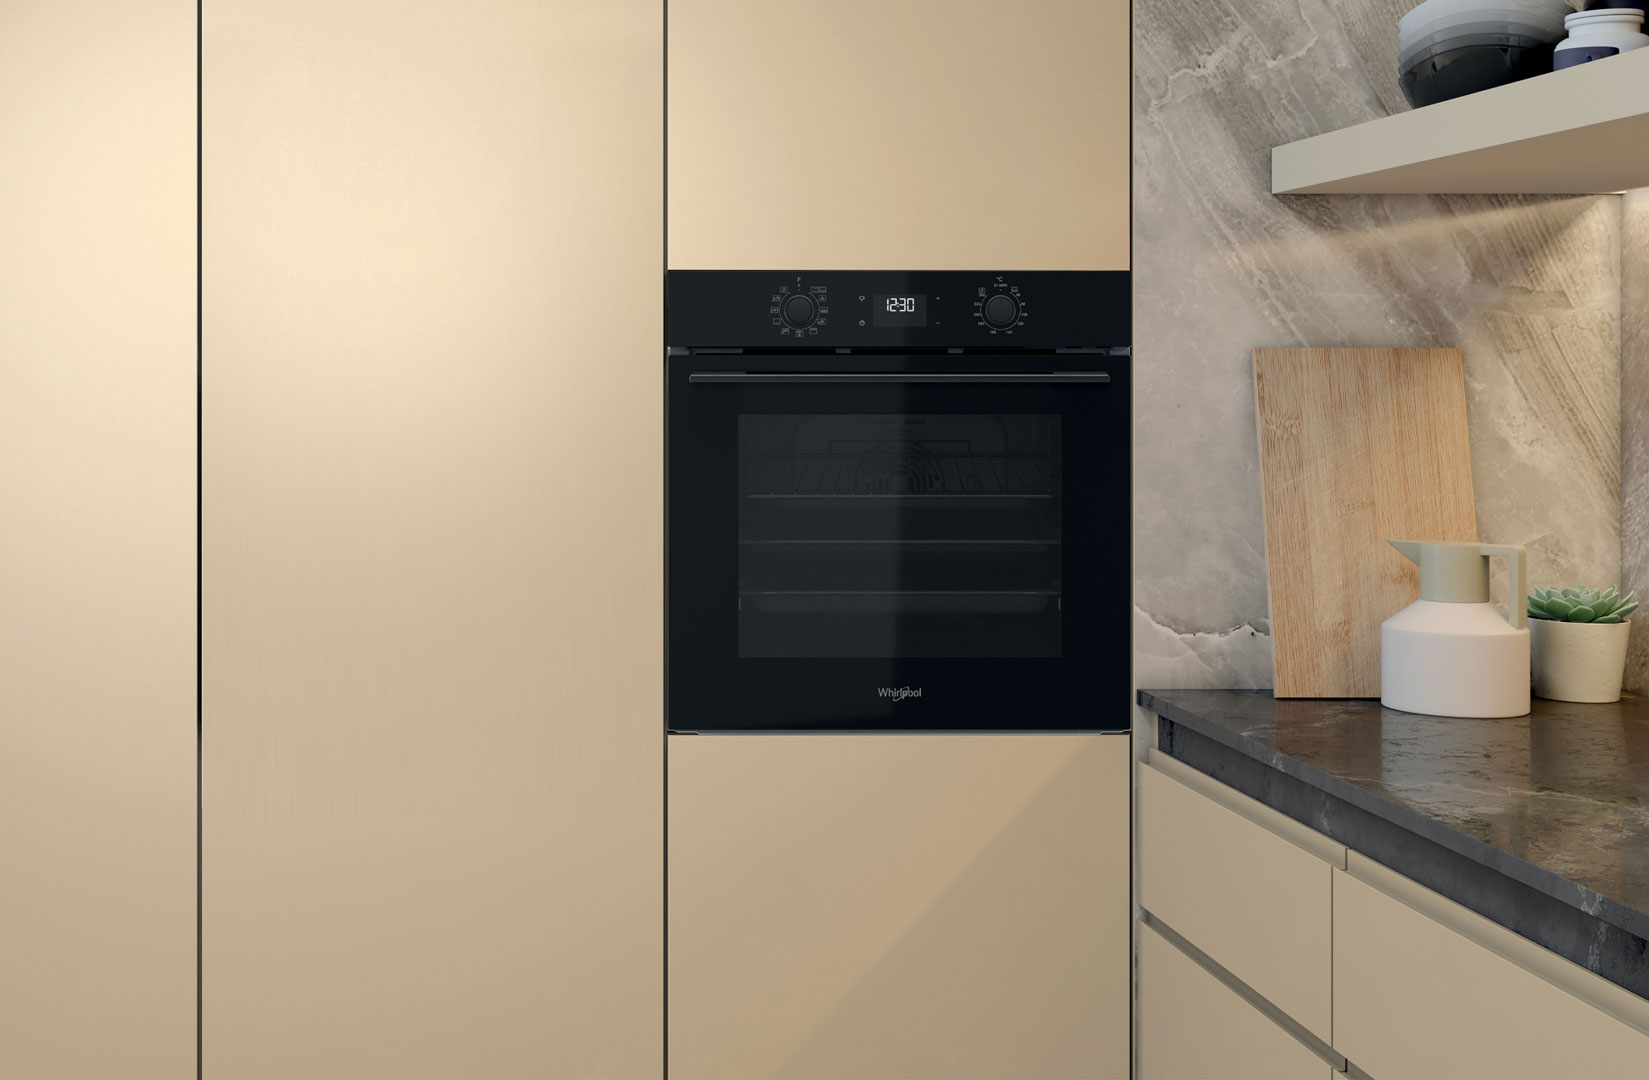 The Elements range of ovens by Whirlpool, for healthy dishes and rapid cleaning